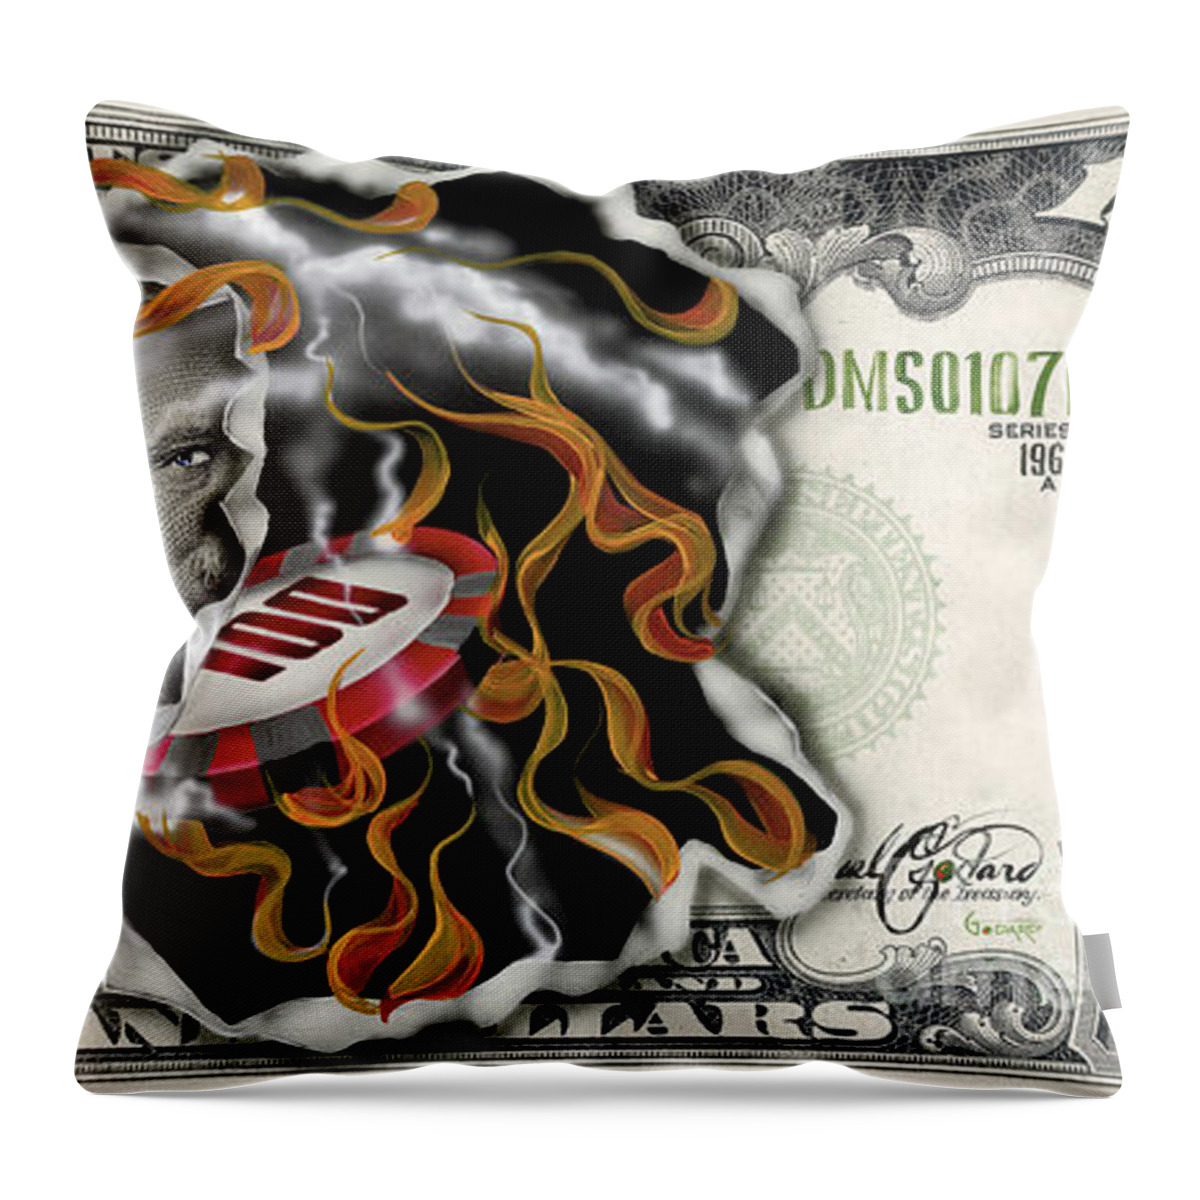 Lucky Numbers Throw Pillow featuring the painting $1000 Bill Winning Big by Michael Godard